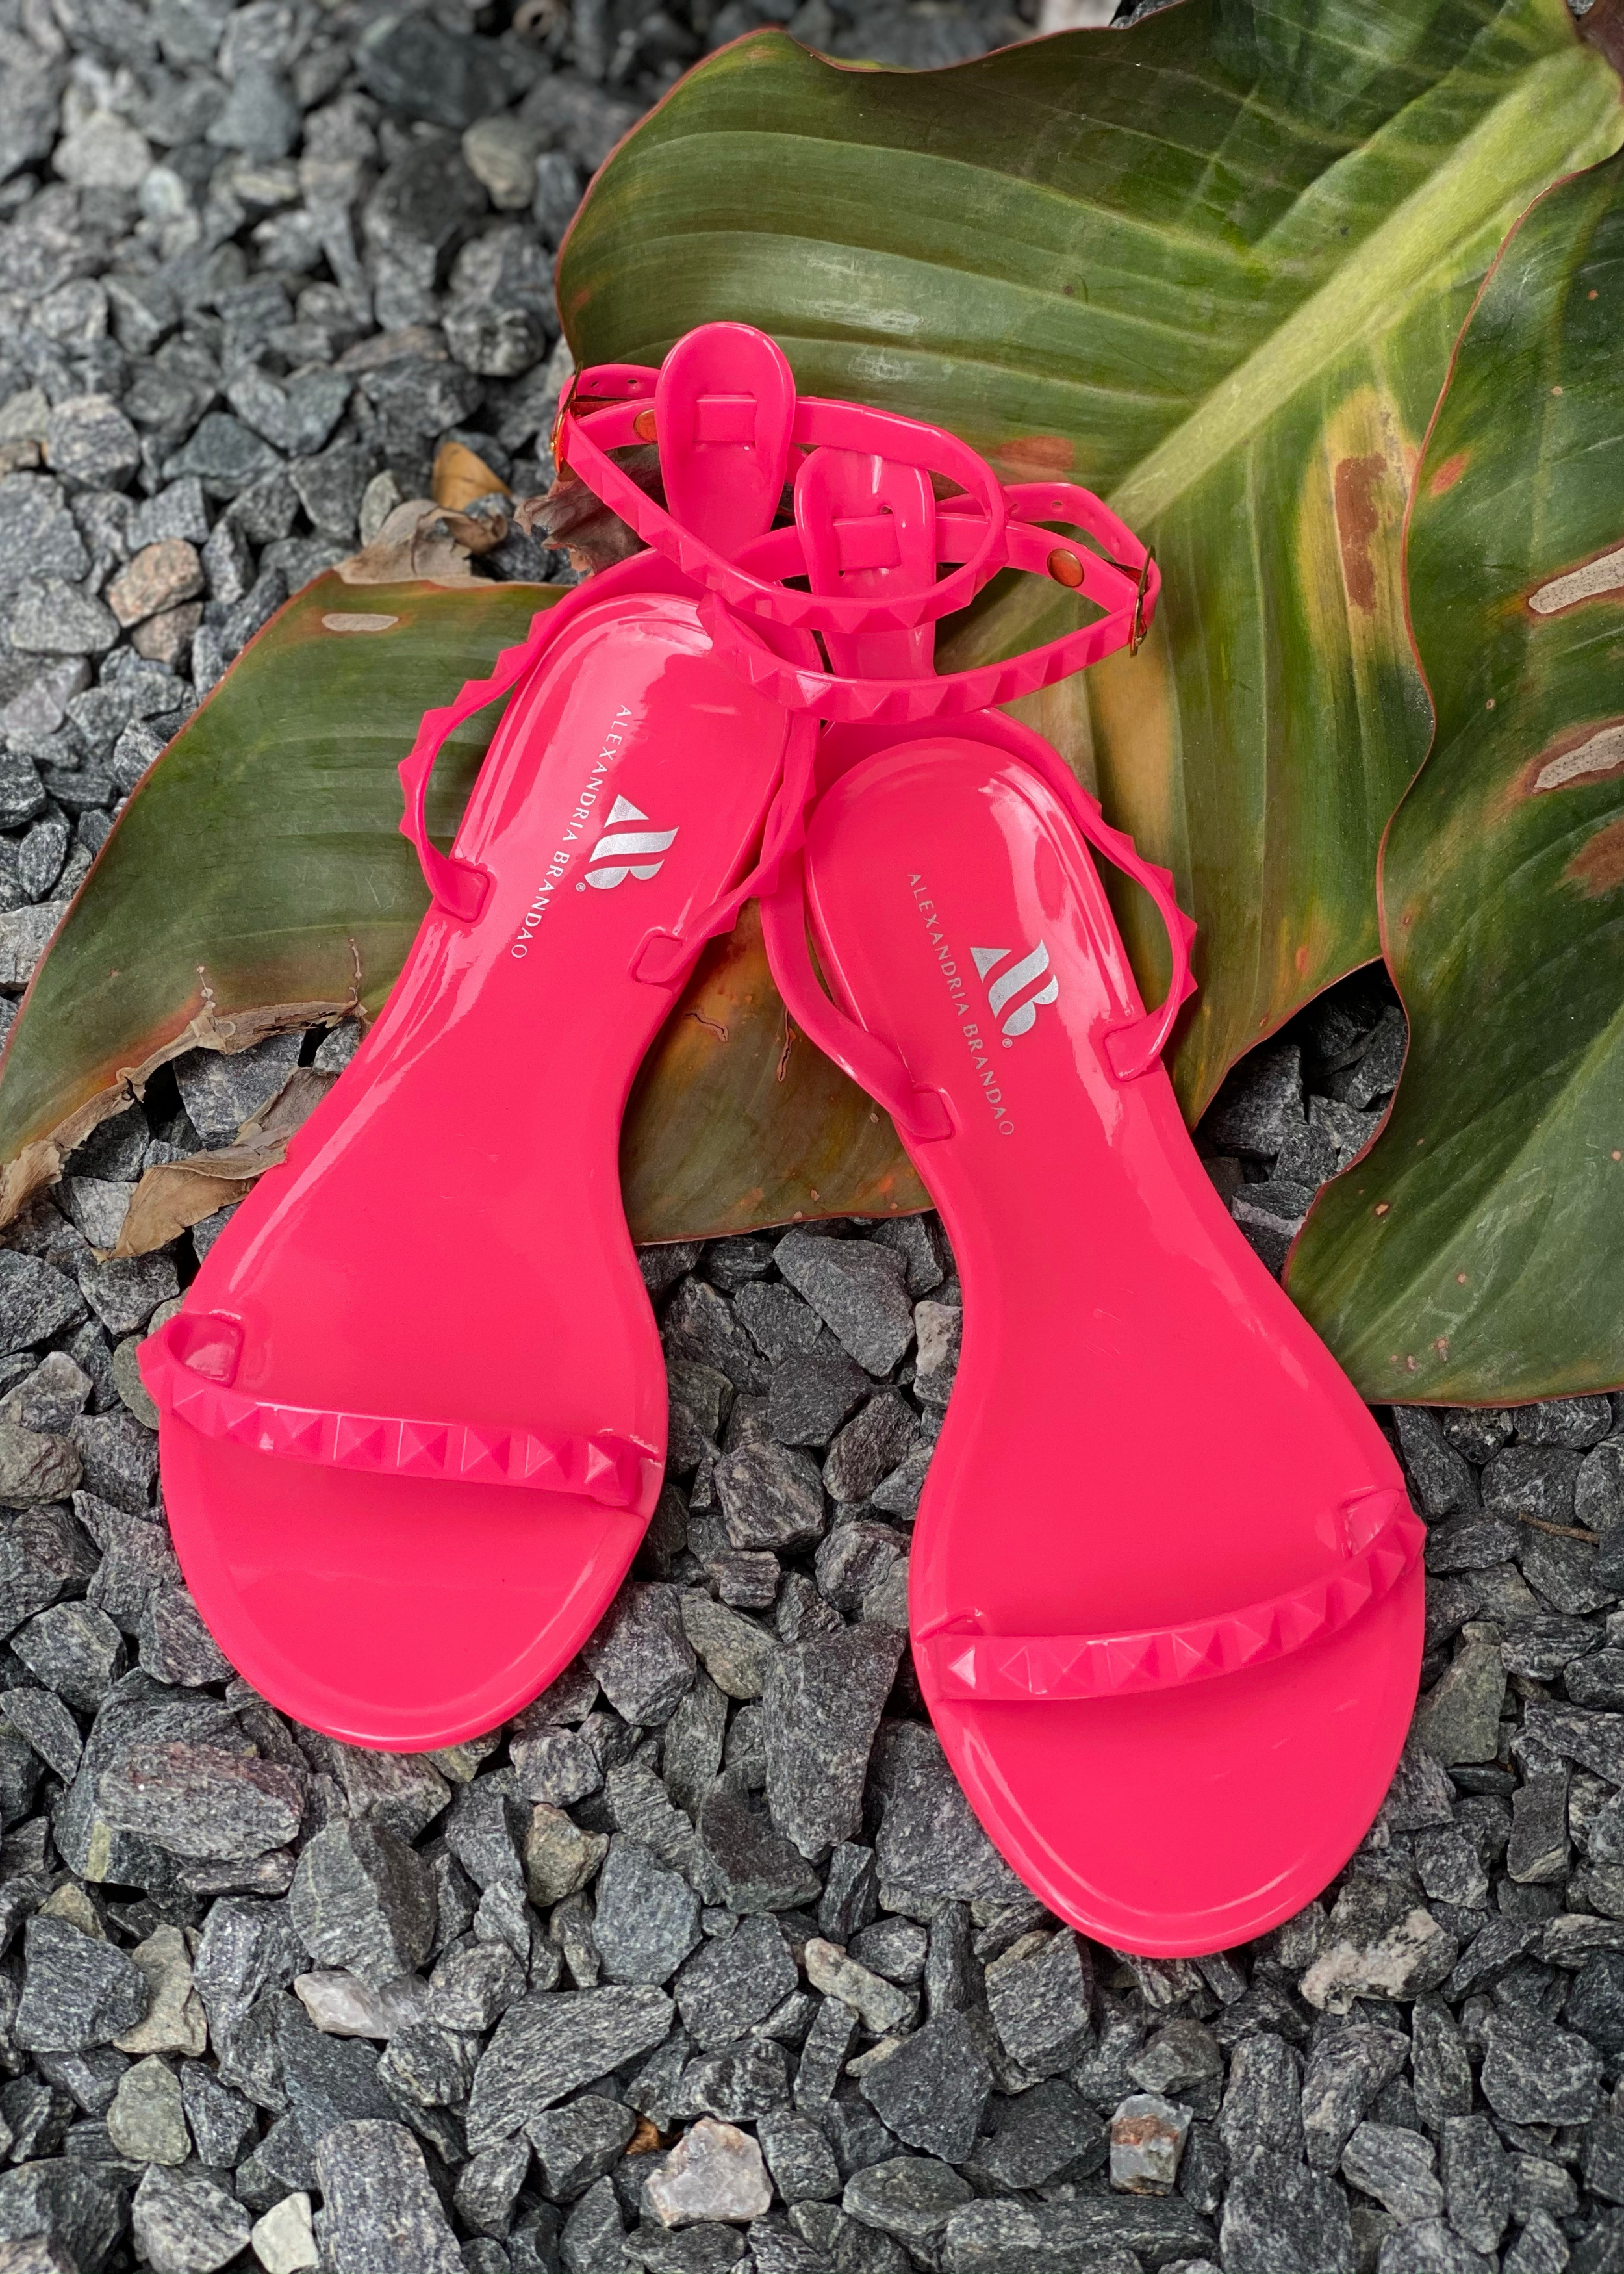 Aria Neon Pink everyday jelly sandals.